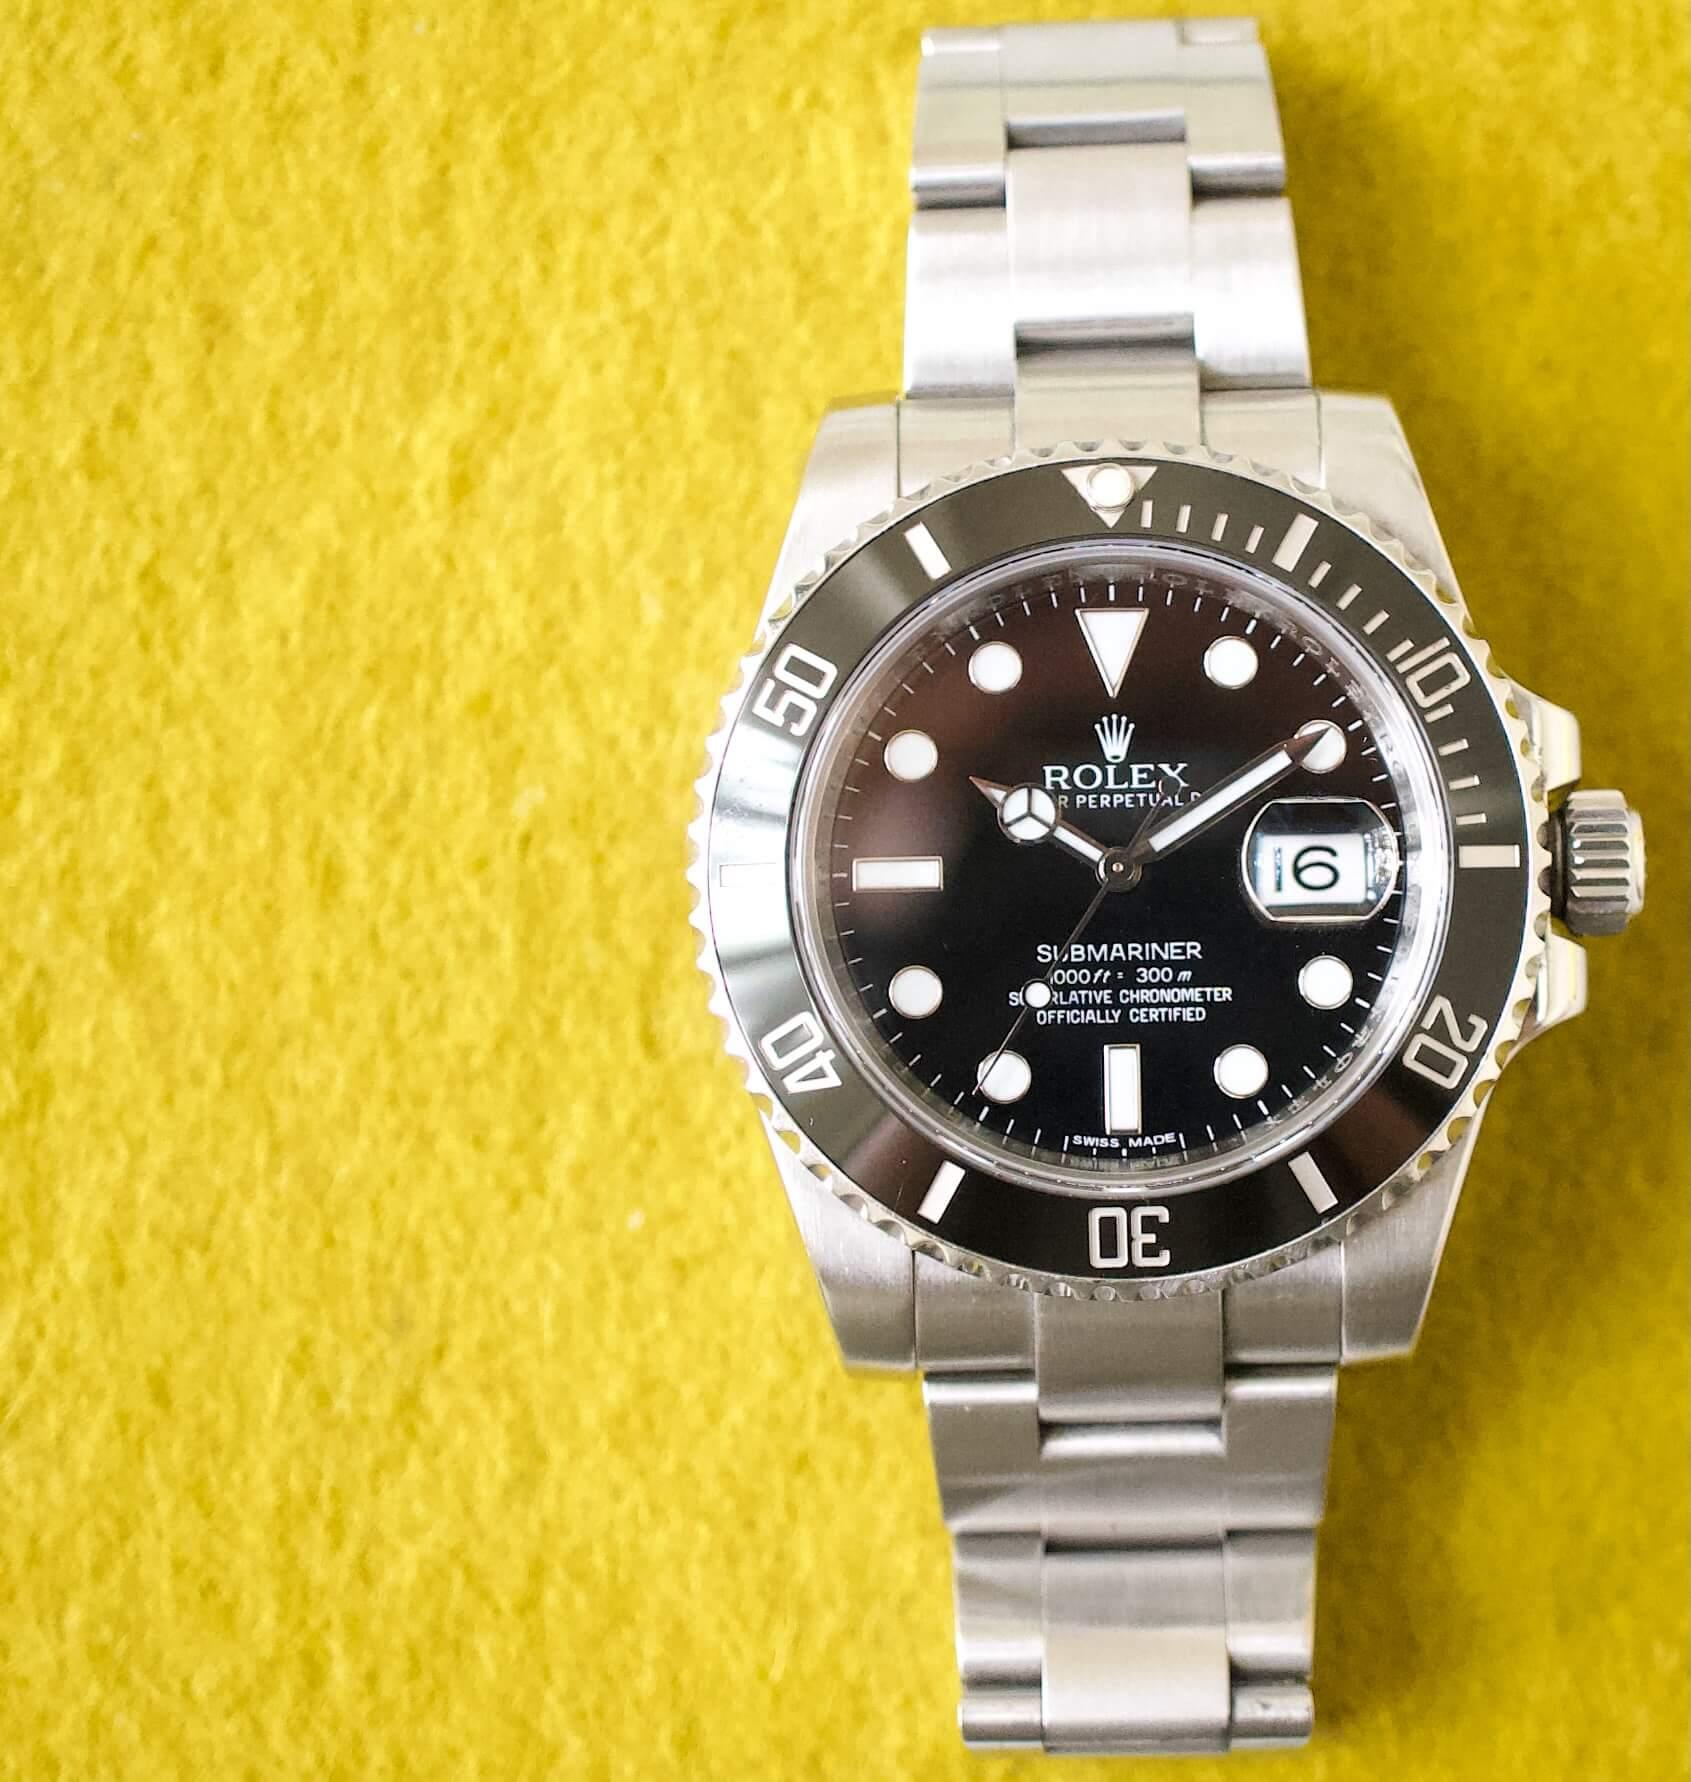 SOLD OUT: ROLEX SUBMARINER DATE 116610 40MM AUTOMATIC BLACK BOX & PAPERS 2013 - WearingTime Luxury Watches